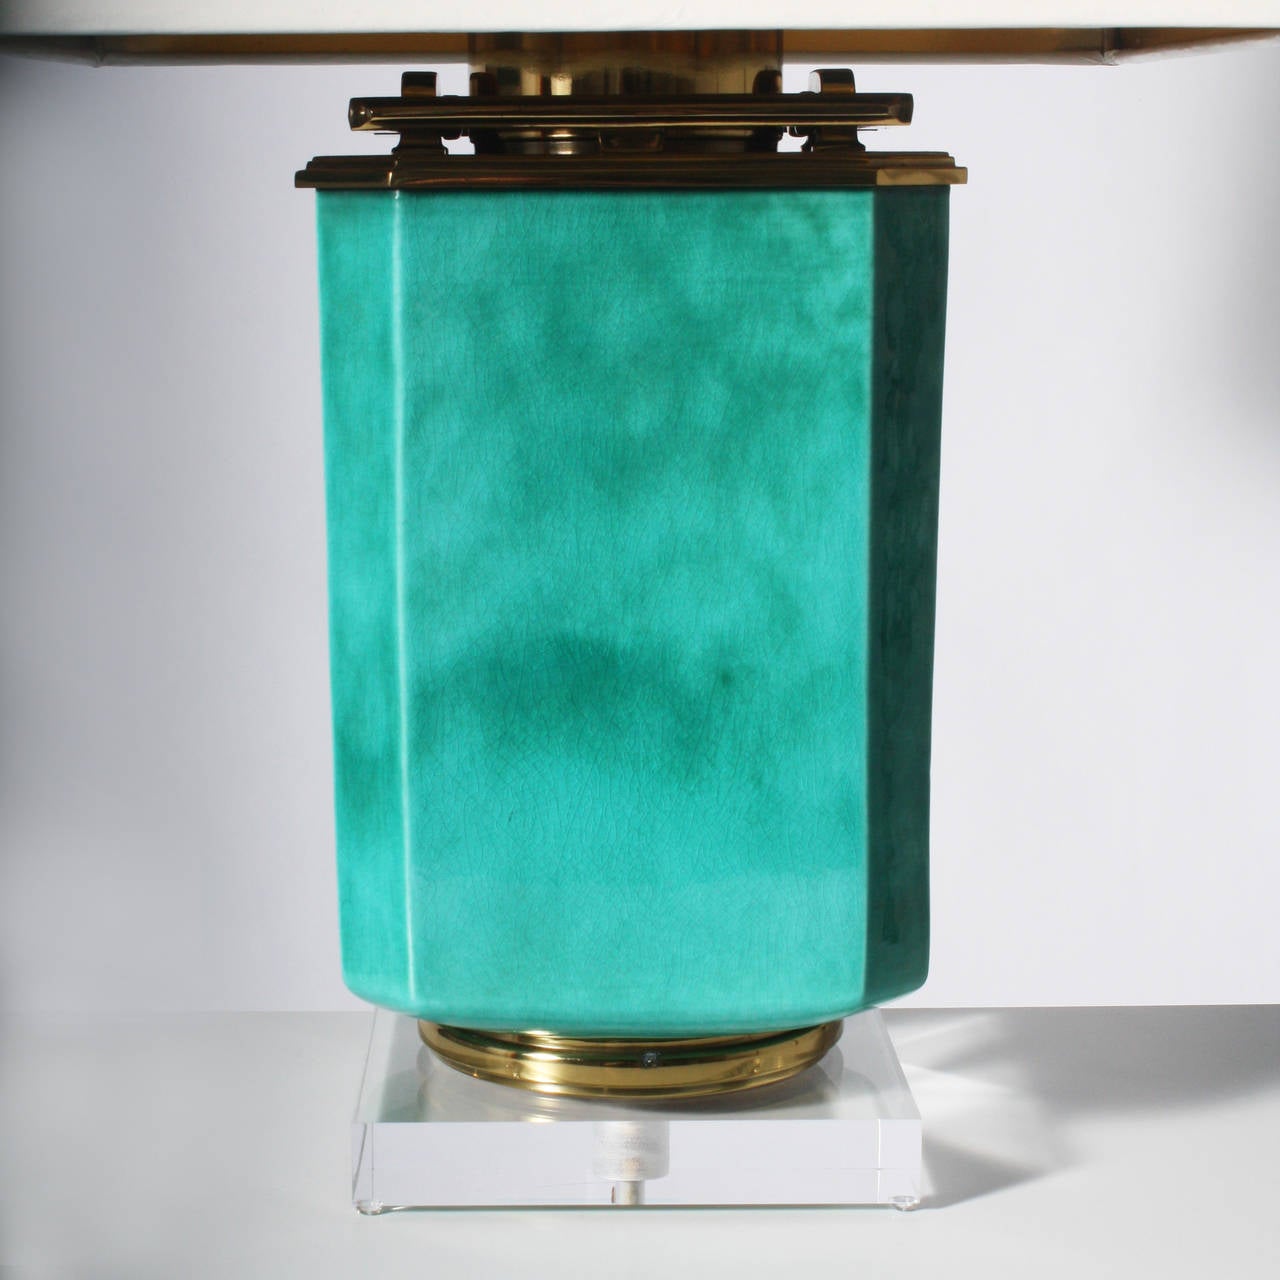 Stiffel Turquoise Ceramic Lamp. Ivory lacquer shade with gold foil interior. 3 way socket, 50/100/150 watt. Brass hardware. Lucite base. Crystal ball finial. Gold twisted cording.